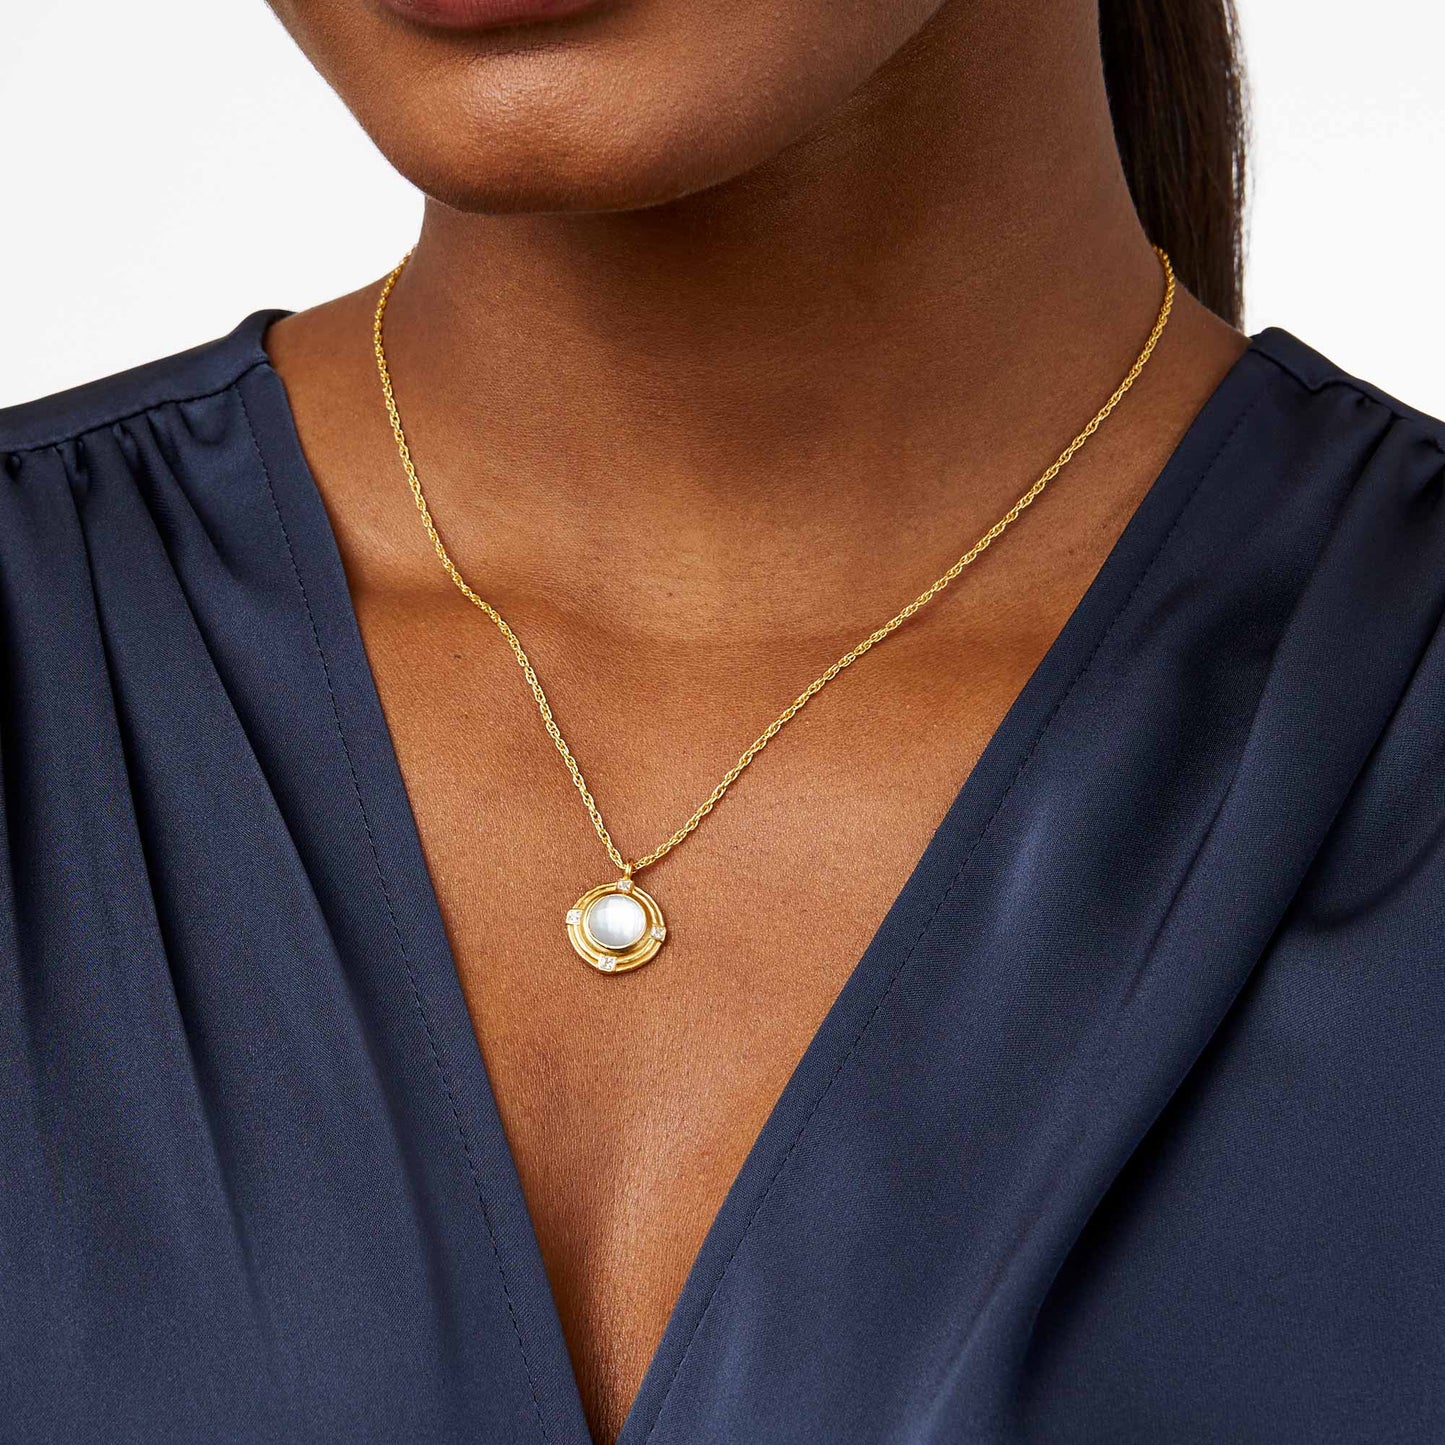 NKL-GPL Astor Solitaire Necklace in Iridescent Peacock Blue